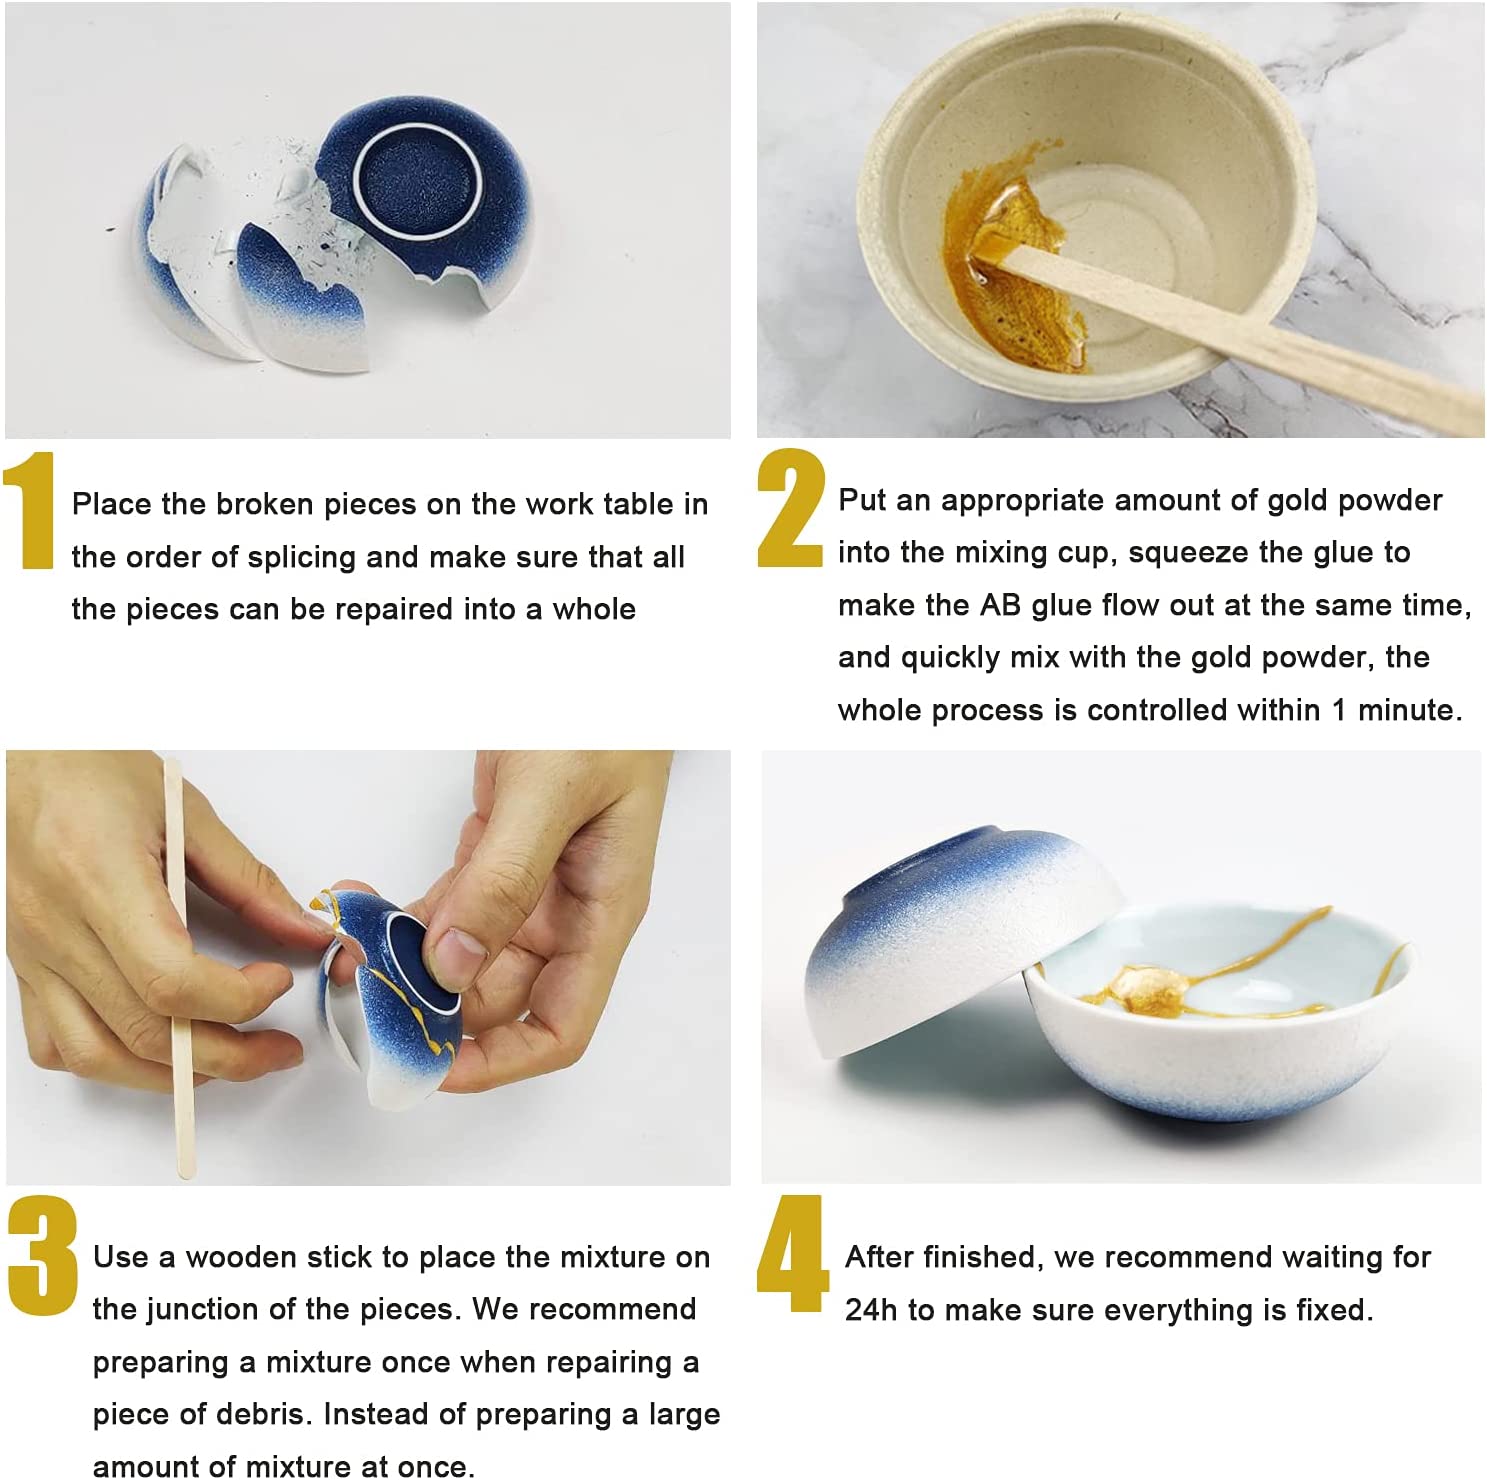 MUFUN Kintsugi Repair Kit Repair Your Meaningful Pottery with Gold Powder Glue - Comes with Two Practice Ceramic Cups for Starter